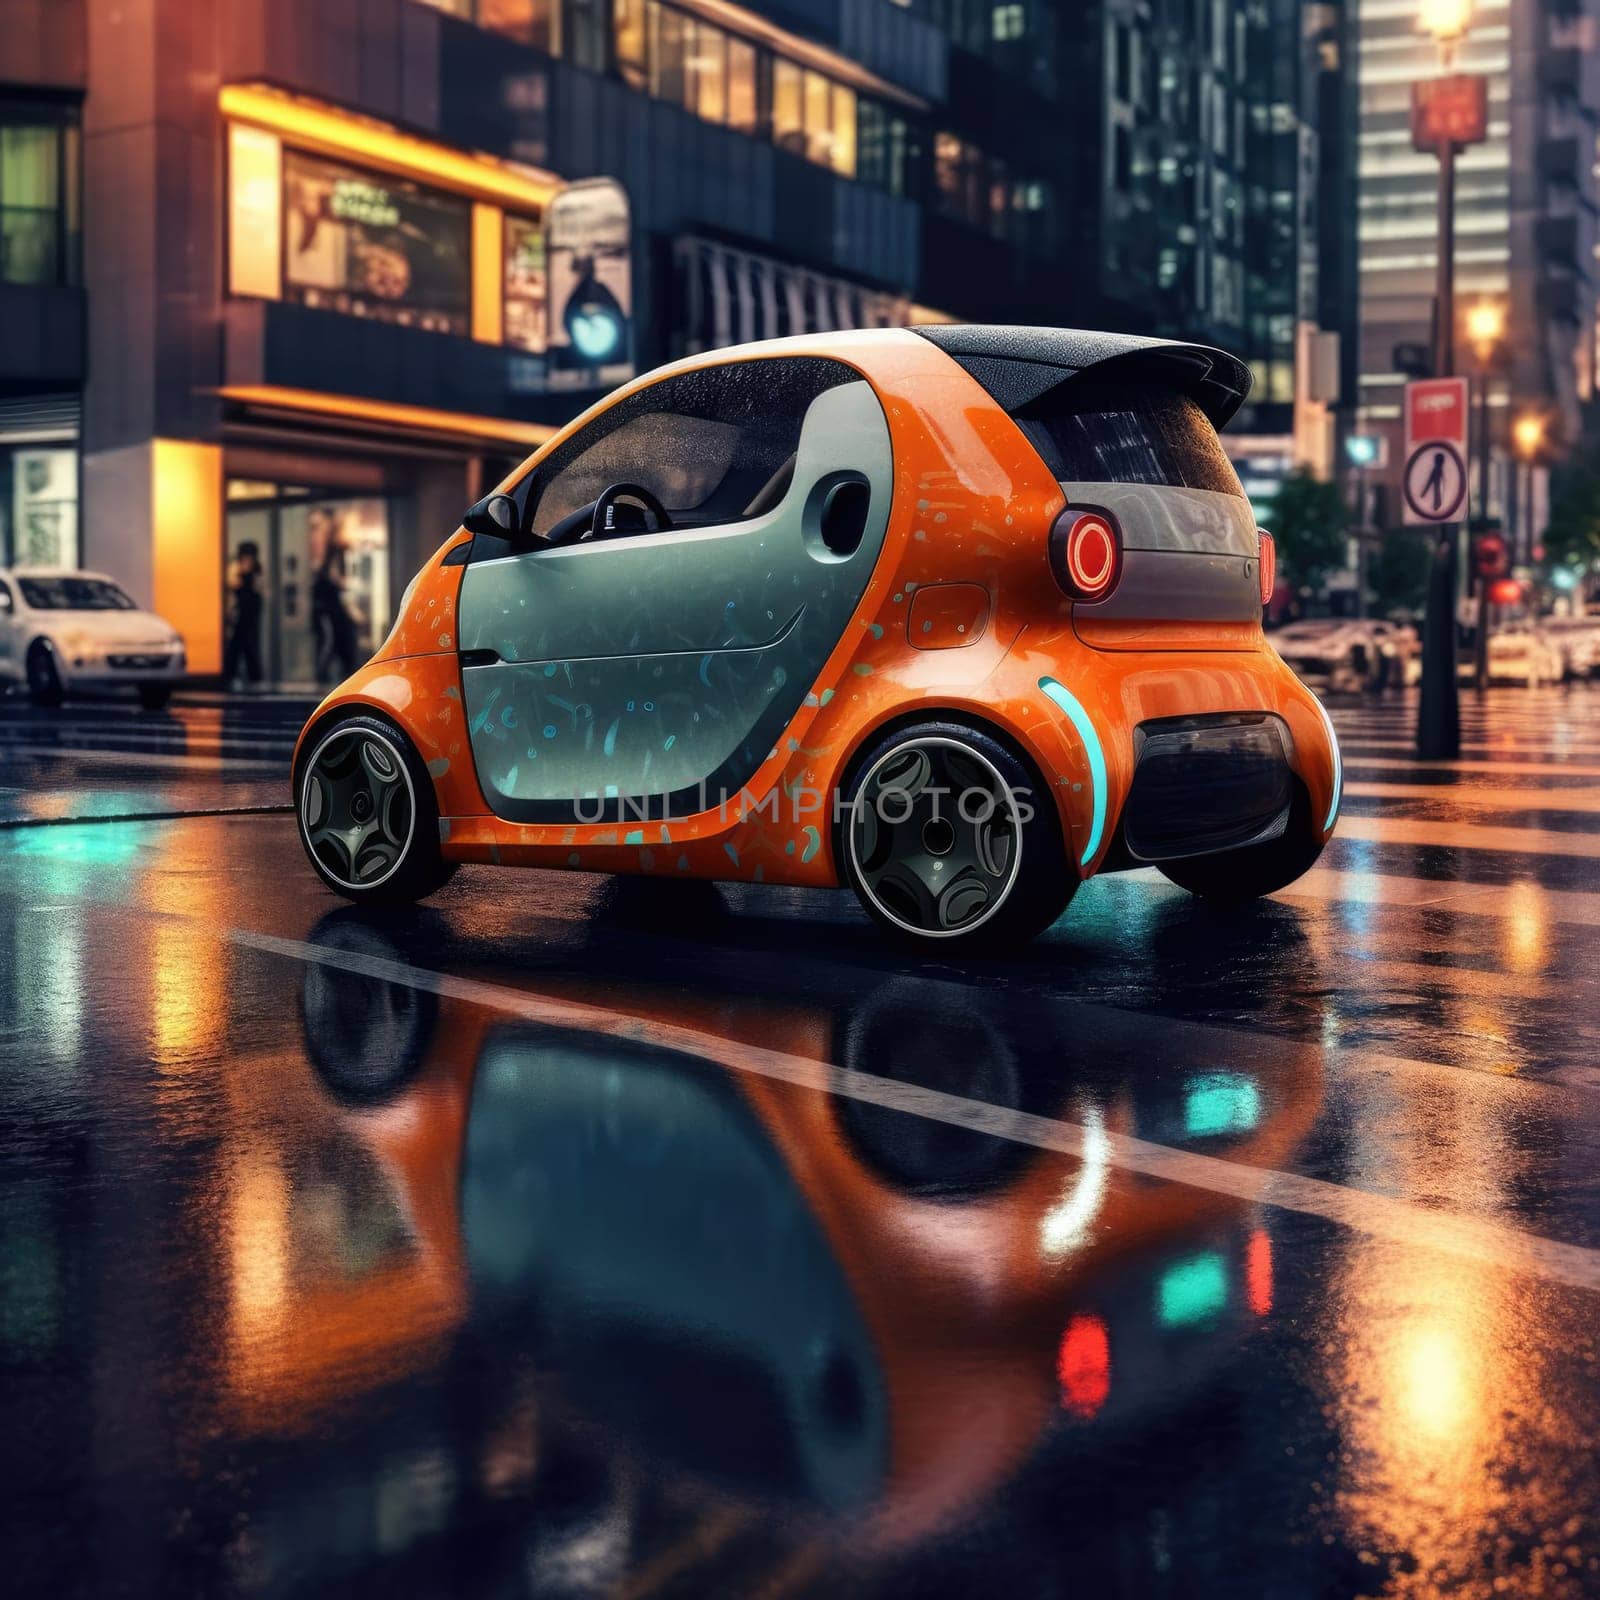 A smart car in a smart city. A vision for the future